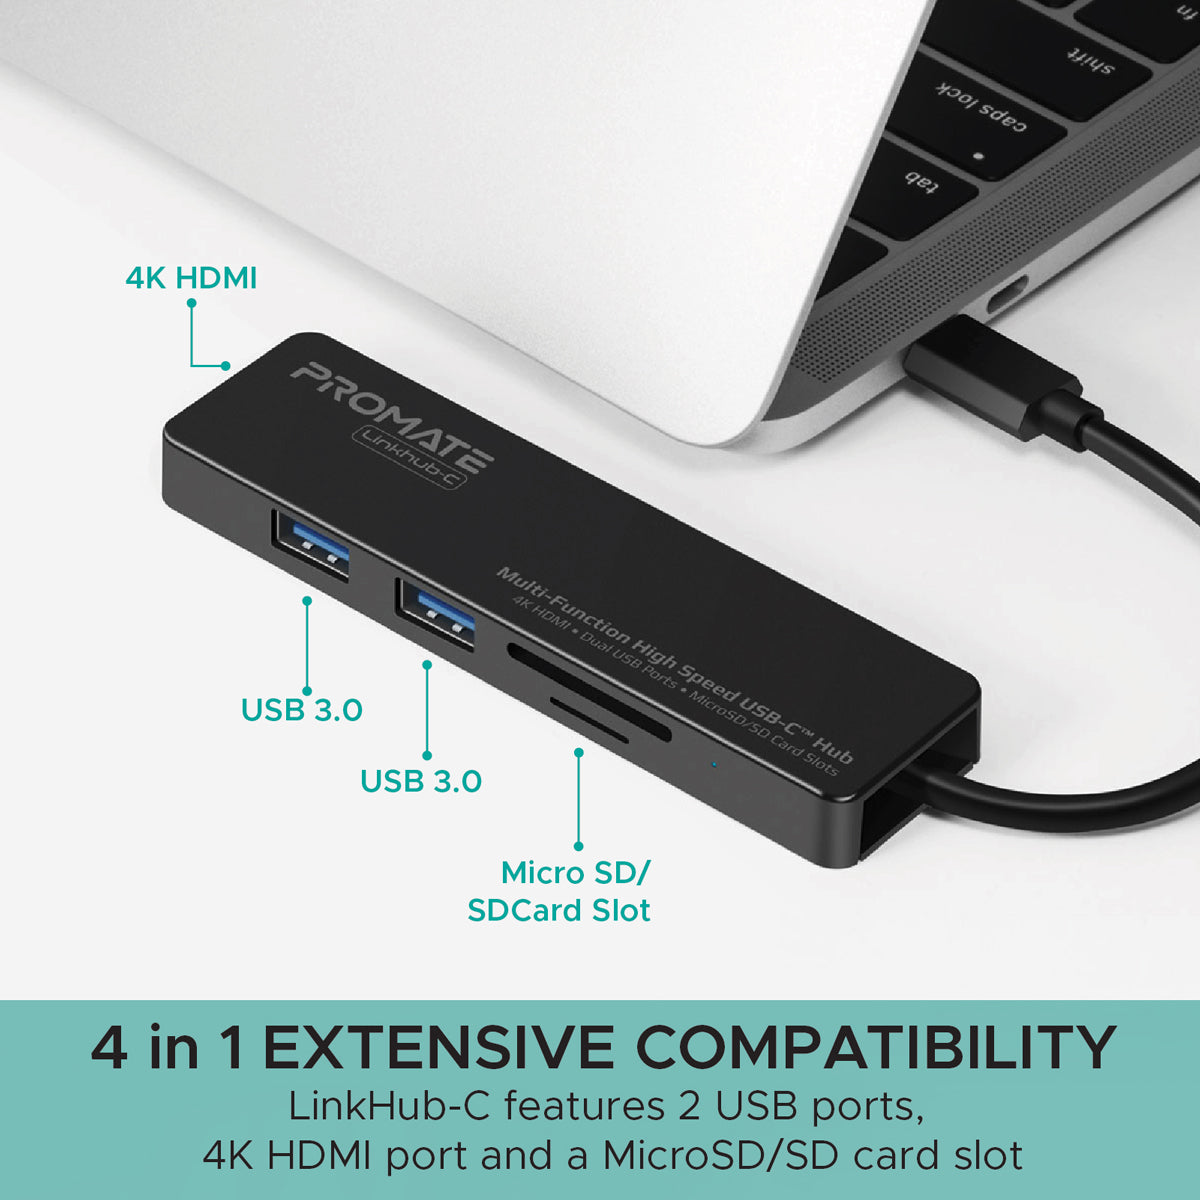 Promate - USB Type-C Hub, High-Speed USB-C Adapter with 4K HDMI Full HD Port, SD/MicroSD Card Slot, 2 USB 3.0 Port and 5Gbps Transfer Speed for MacBook Pro and Type-C laptop, LinkHub-C